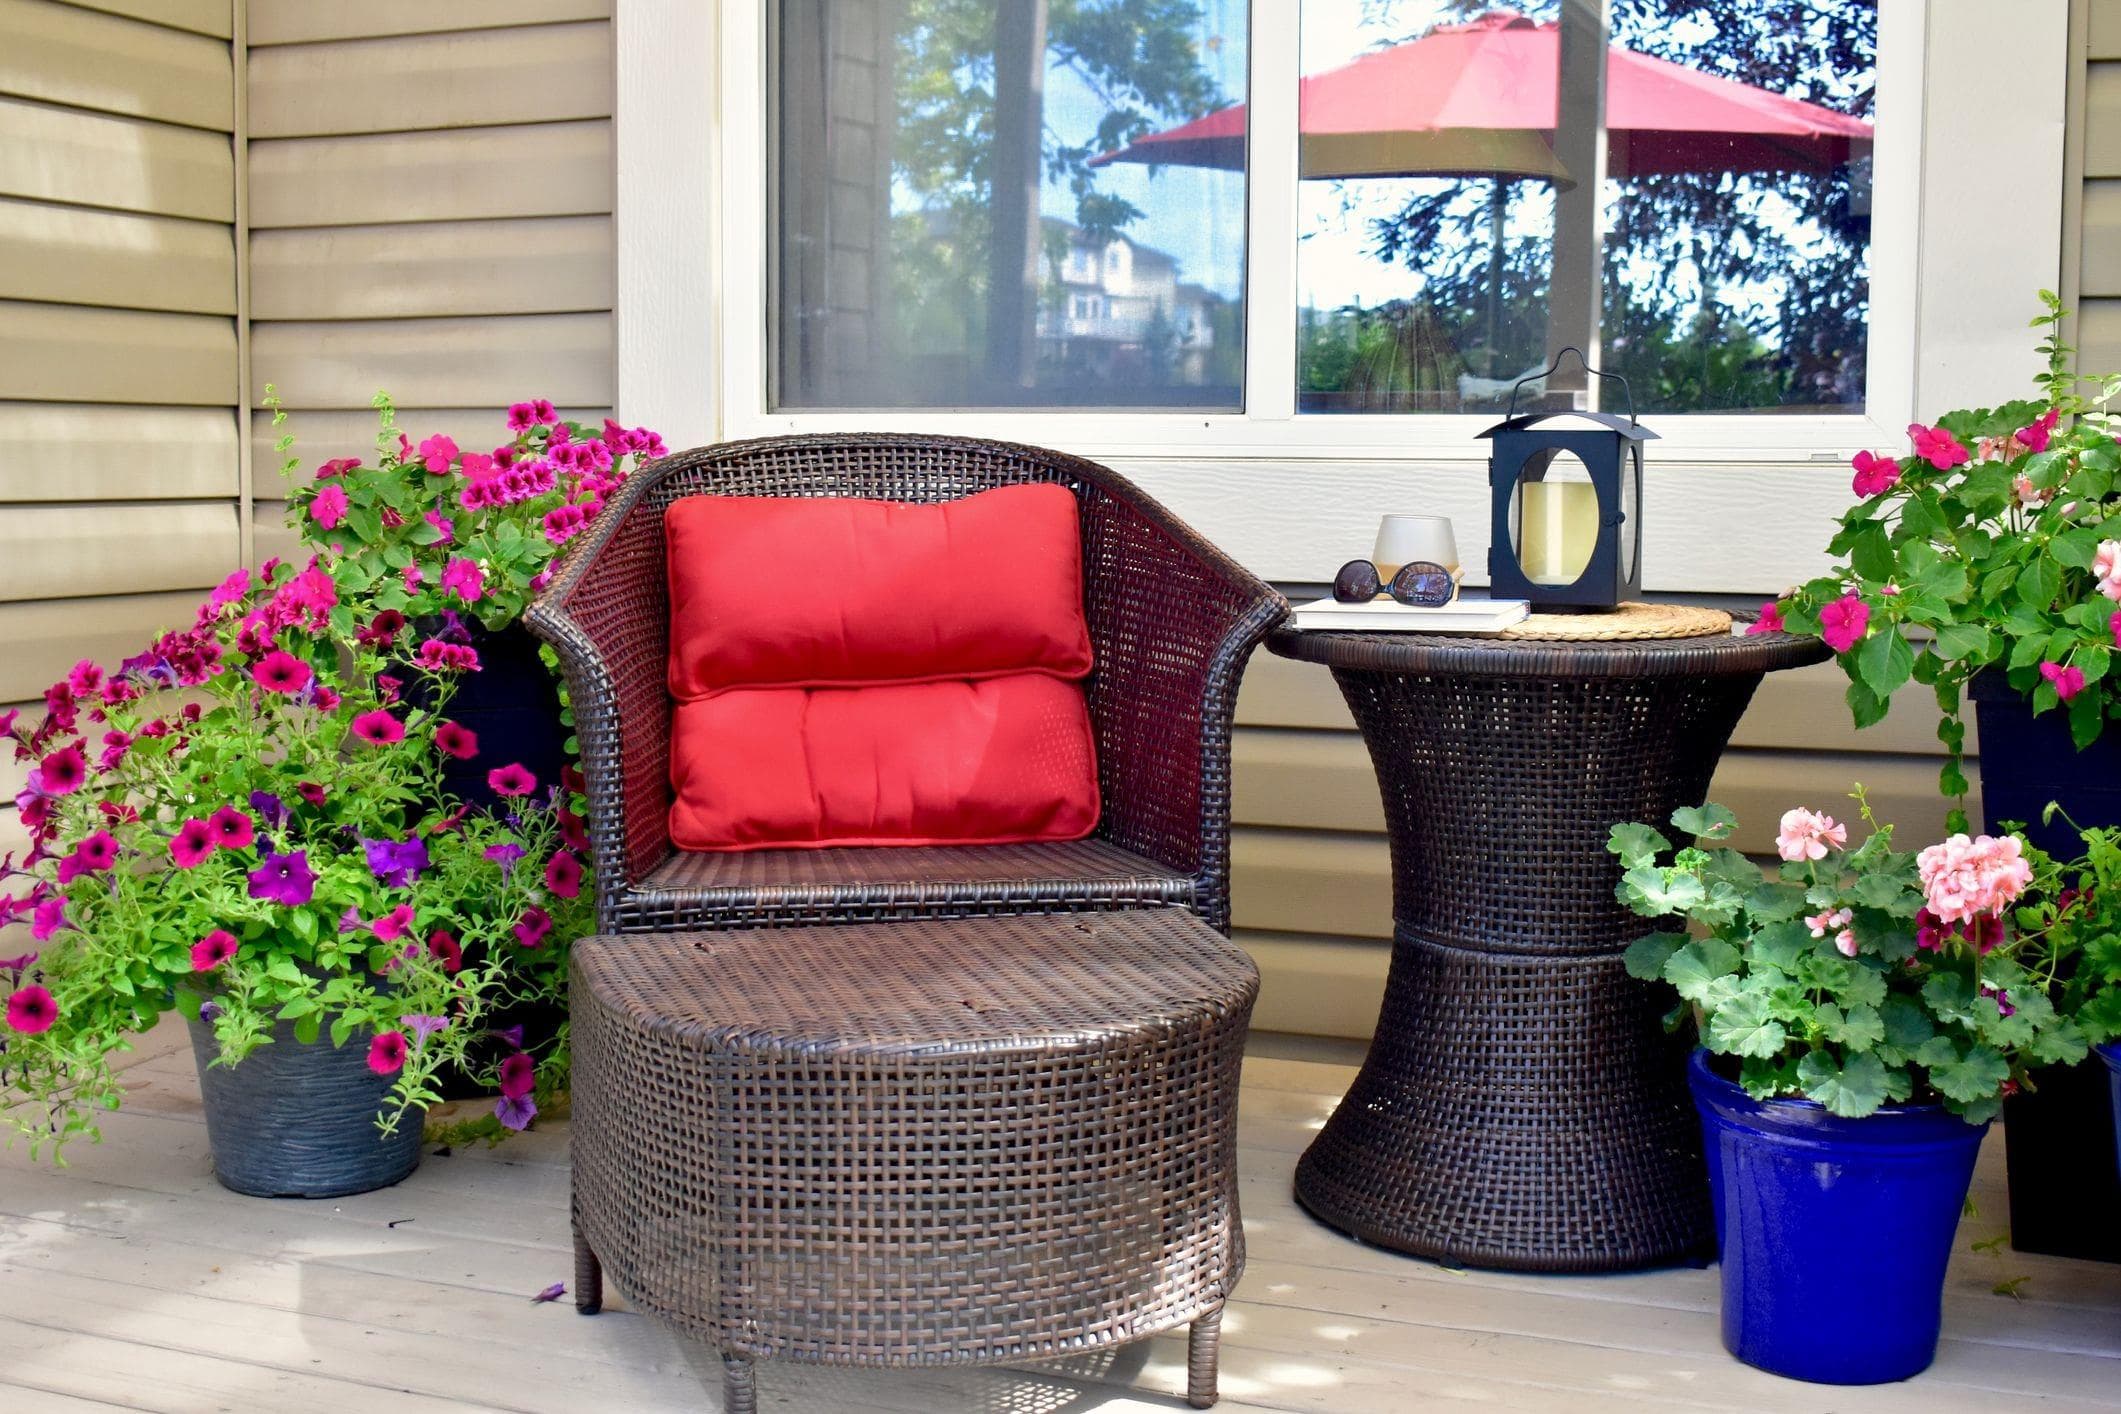 front porch home accessories and plants